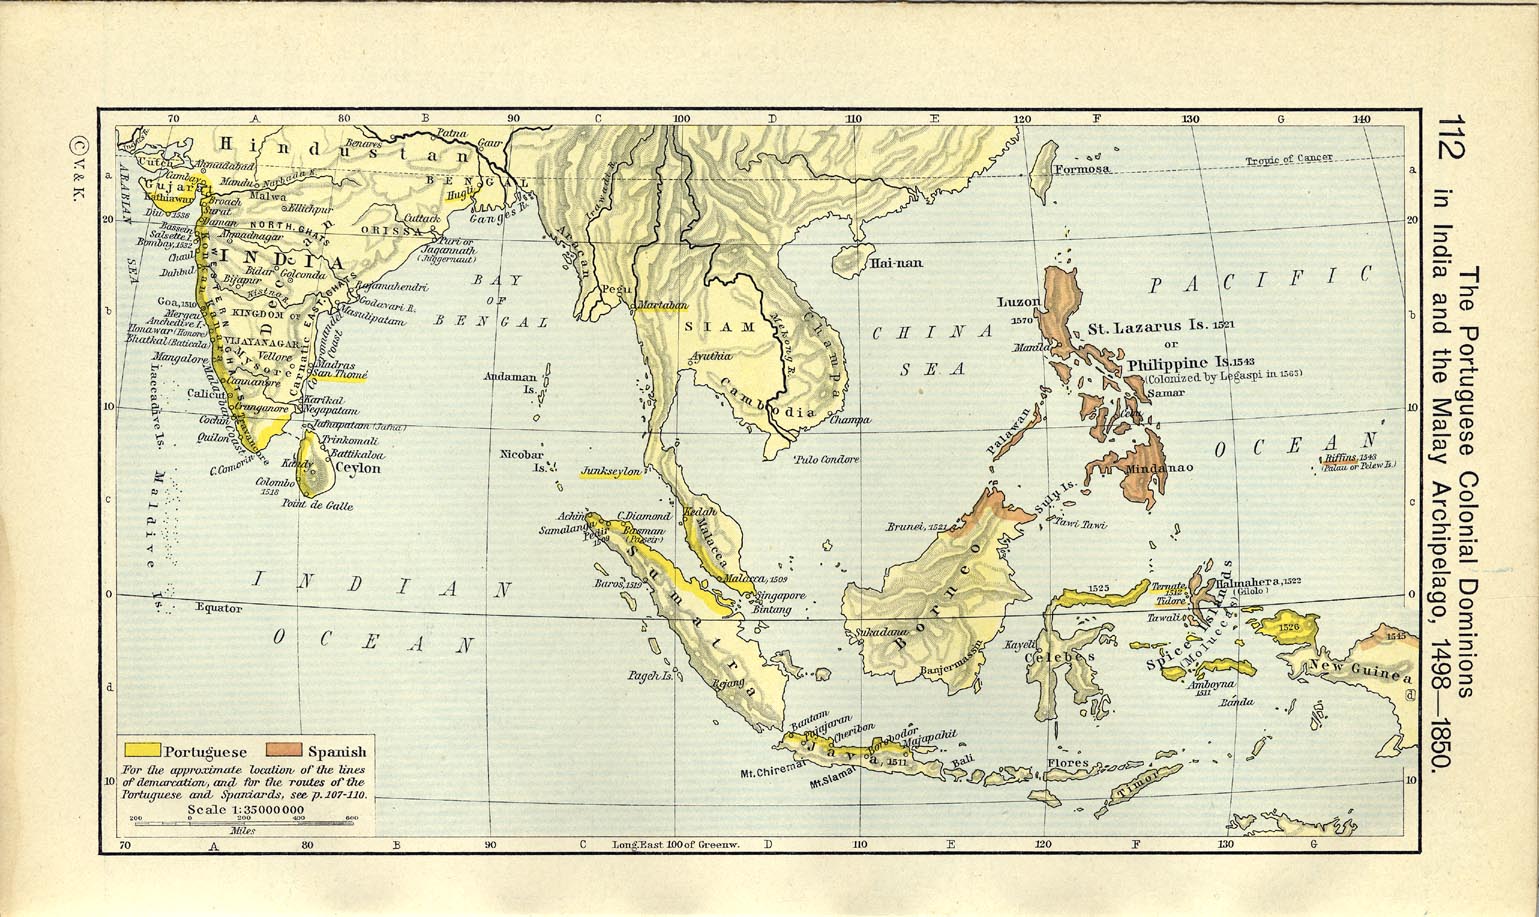 Map of the Portuguese Colonial Dominions in India and the Malay Archipelago, 1498-1850